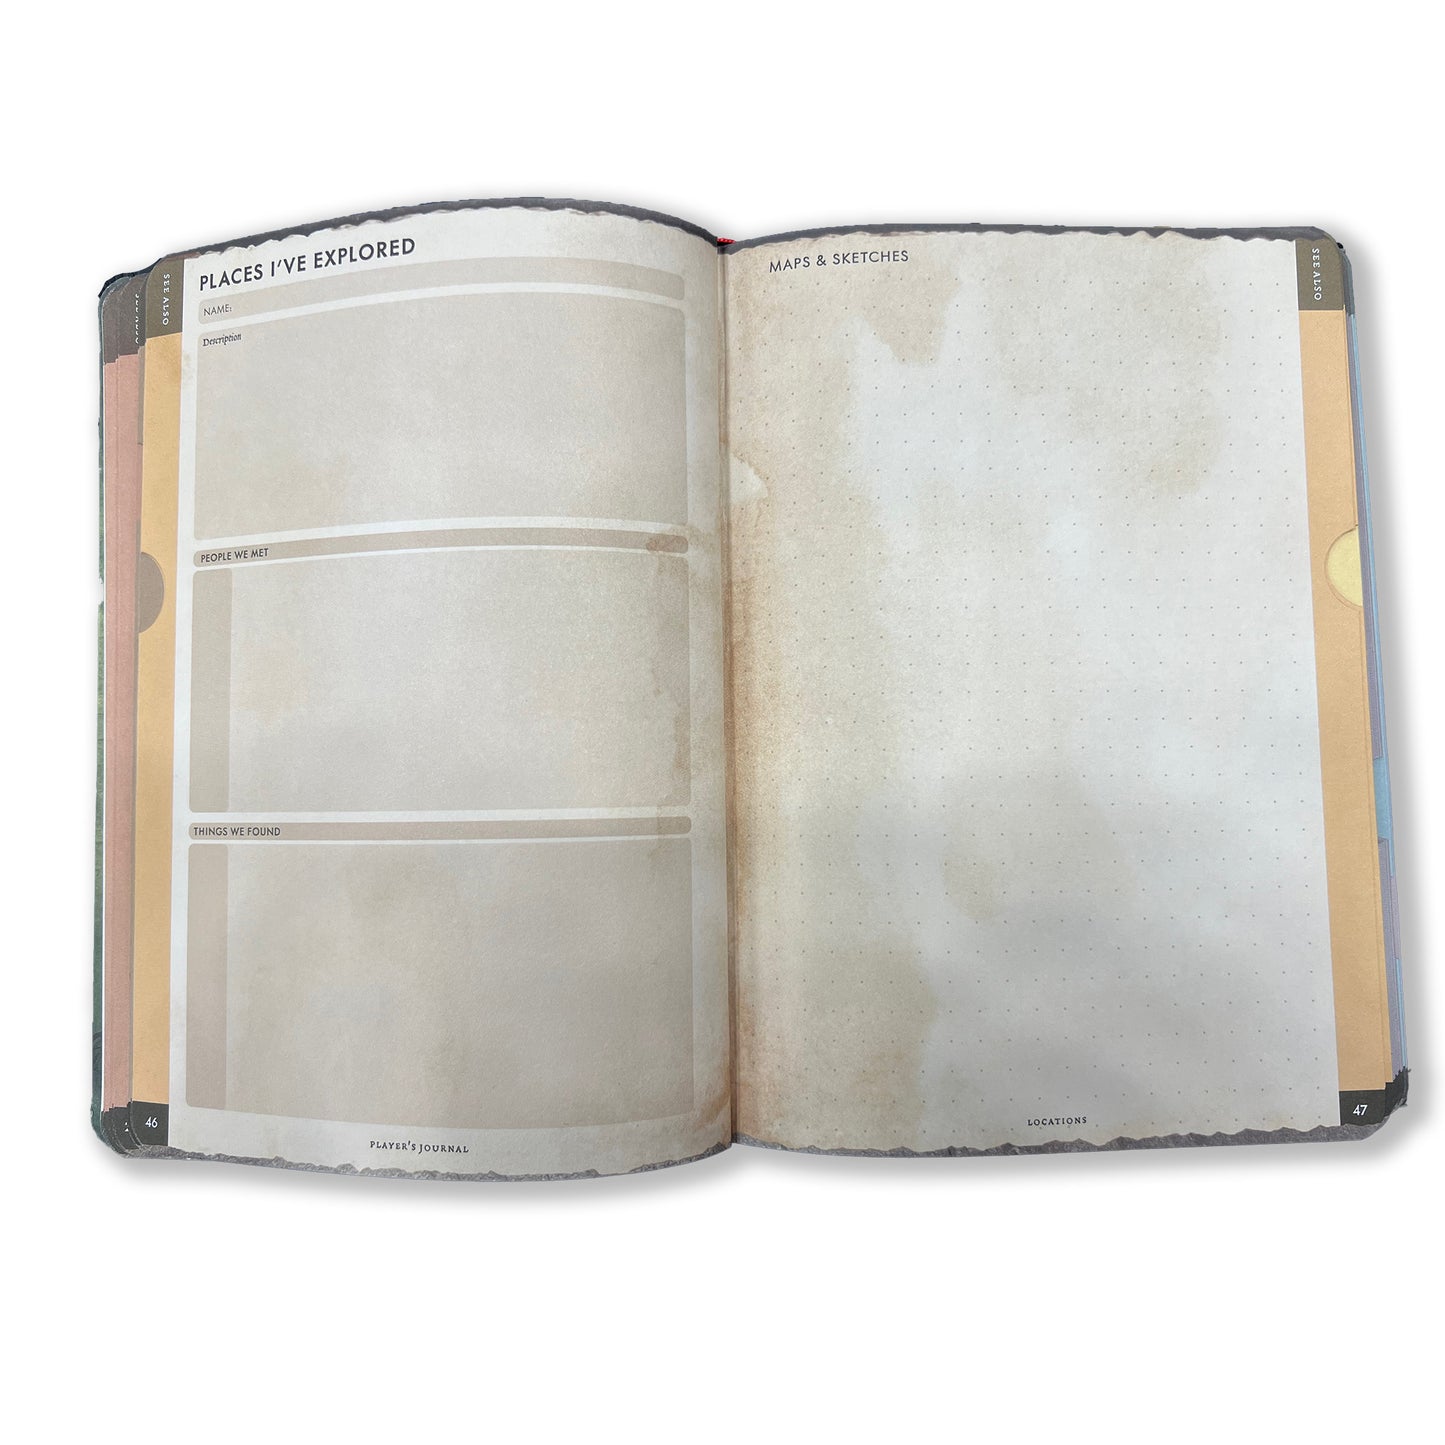 Player's Journal